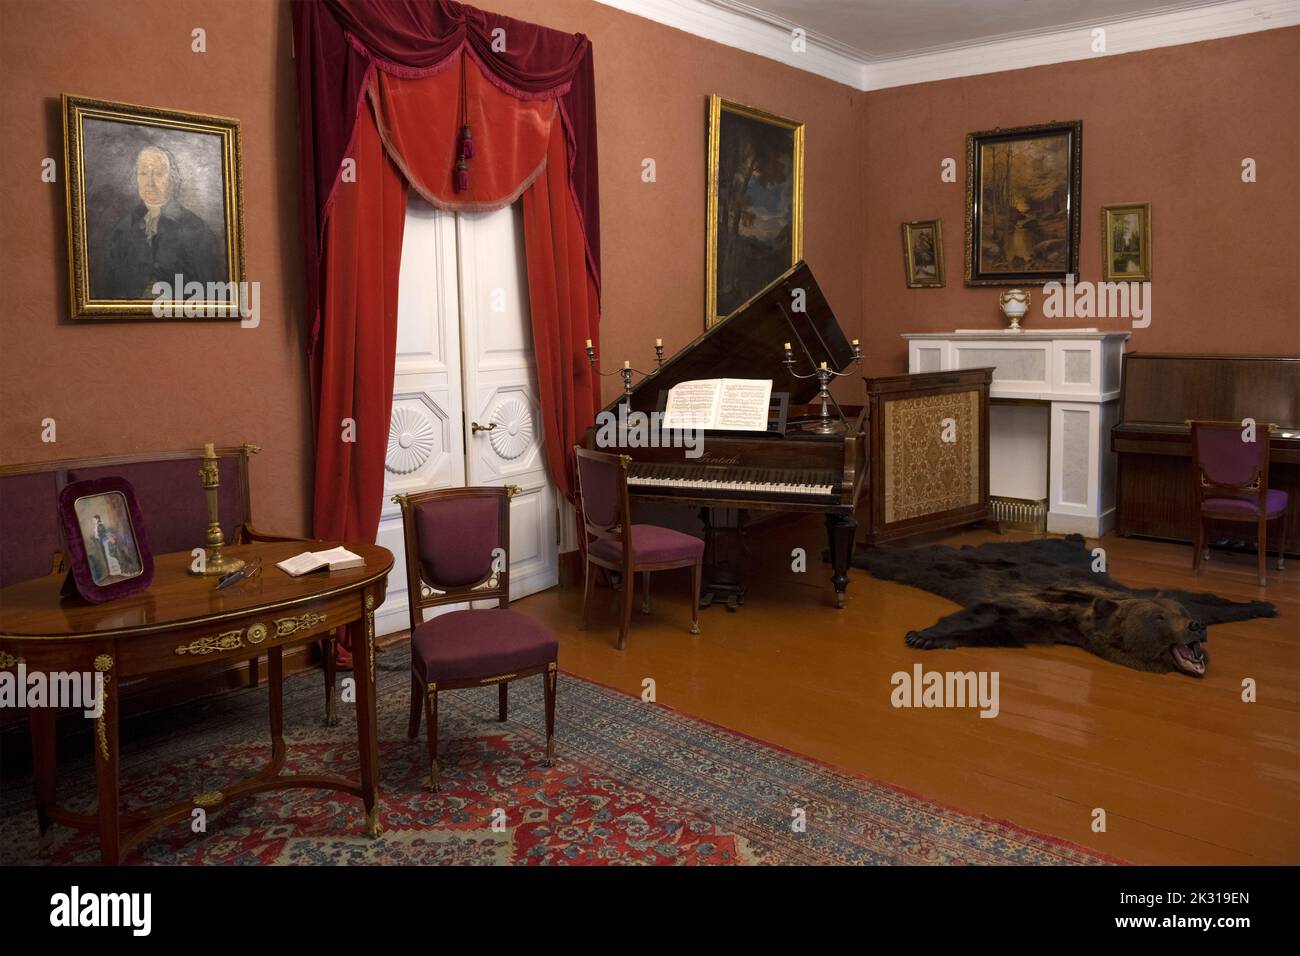 DANILOVSKOE, RUSSIA - AUGUST 04, 2022: The interior of the living room of the old noble estate of the Batyushkovs, in which the Russian writer A.I. Ku Stock Photo